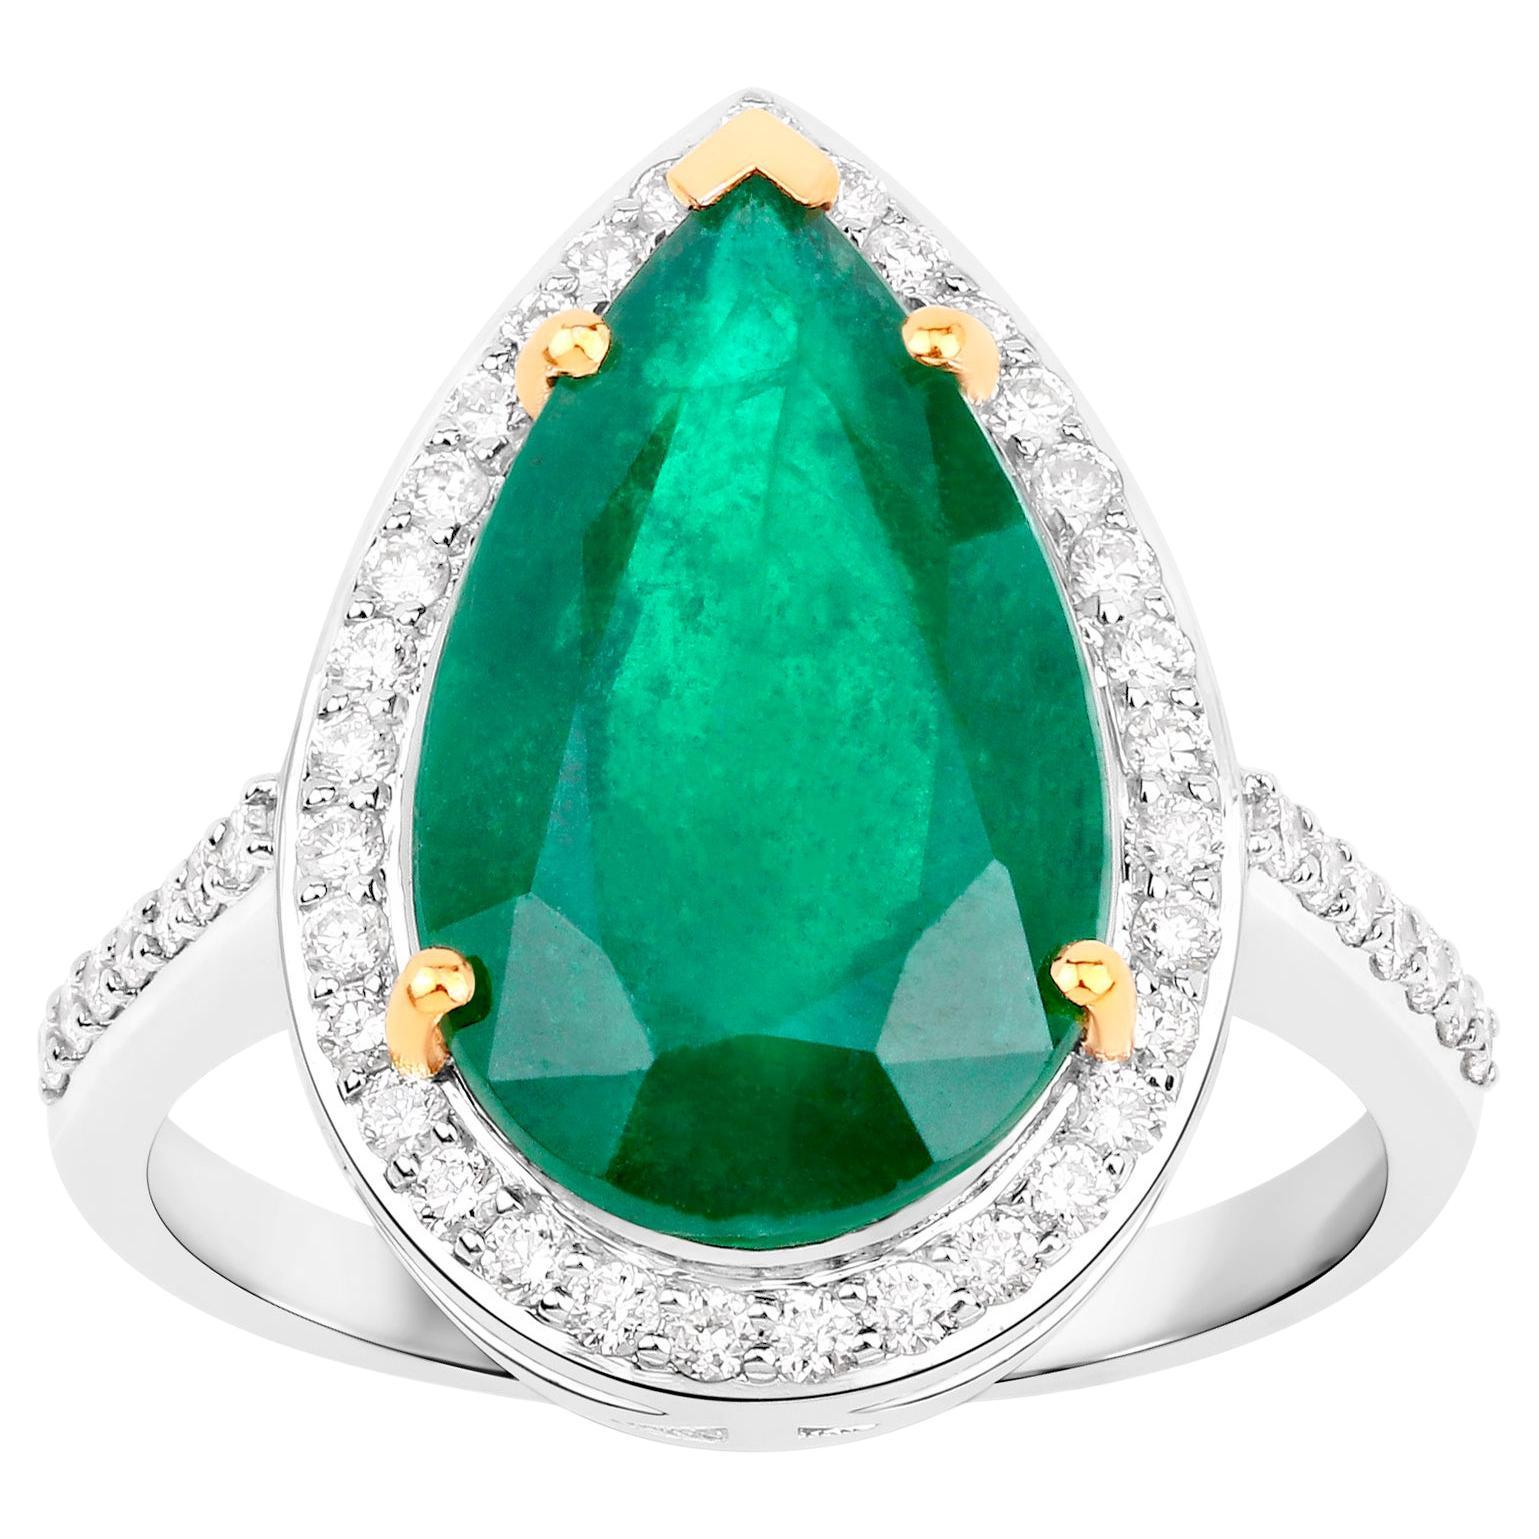 IGI Certified Zambian Emerald Ring With Diamonds 5.94 Carats 14K Gold For Sale